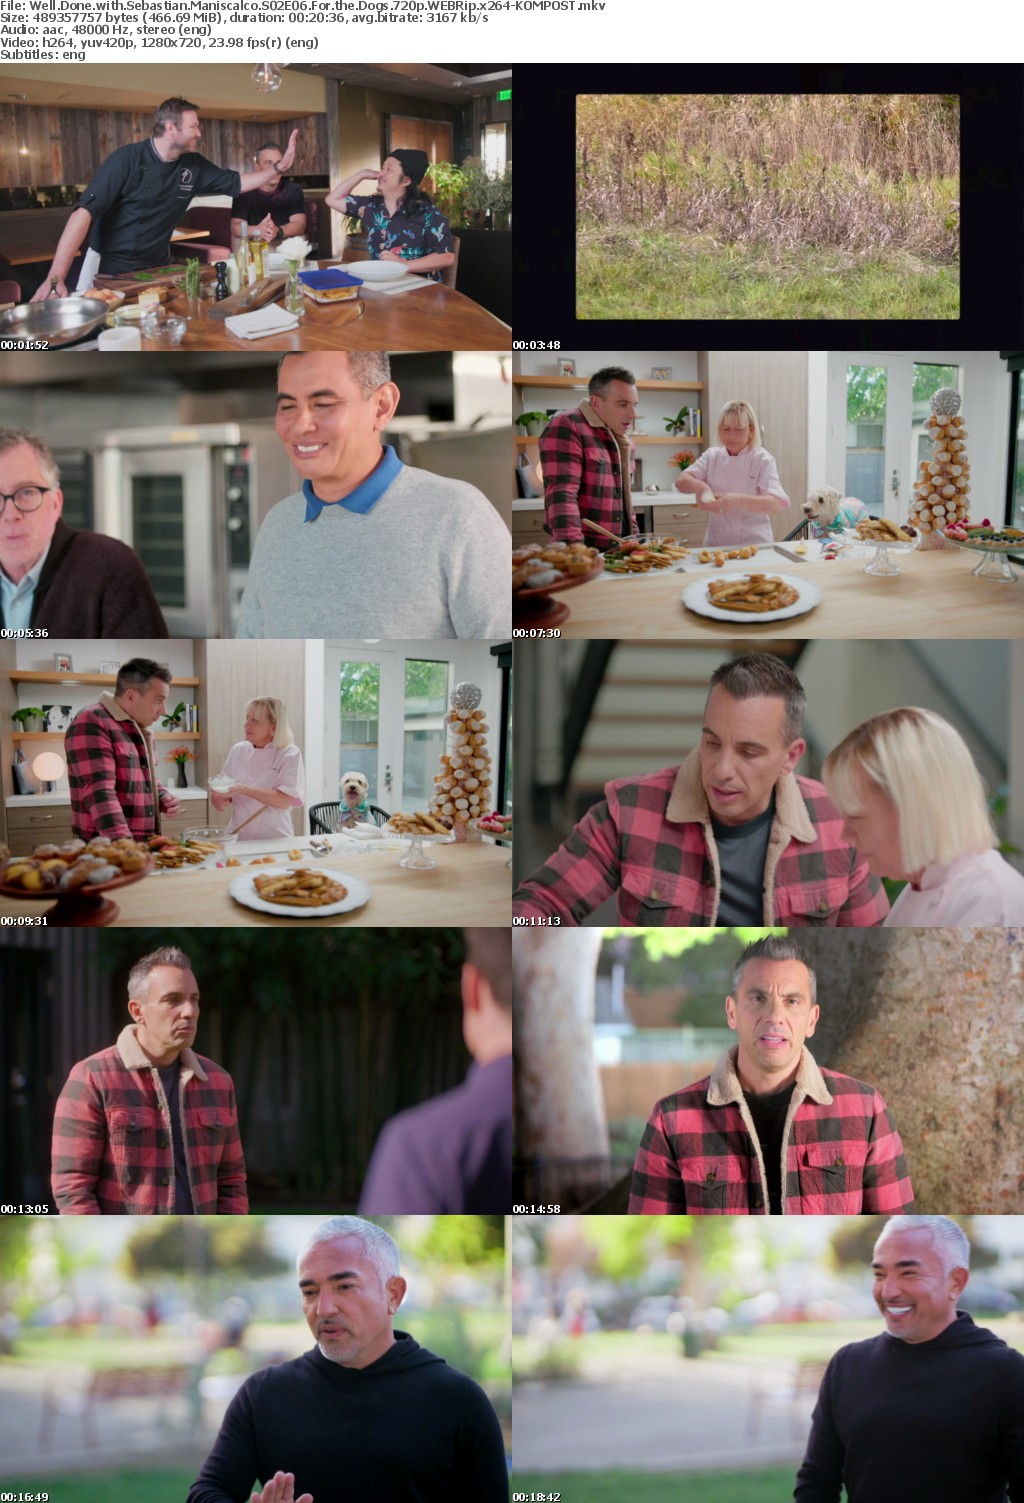 Well Done with Sebastian Maniscalco S02E06 For the Dogs 720p WEBRip x264-KOMPOST